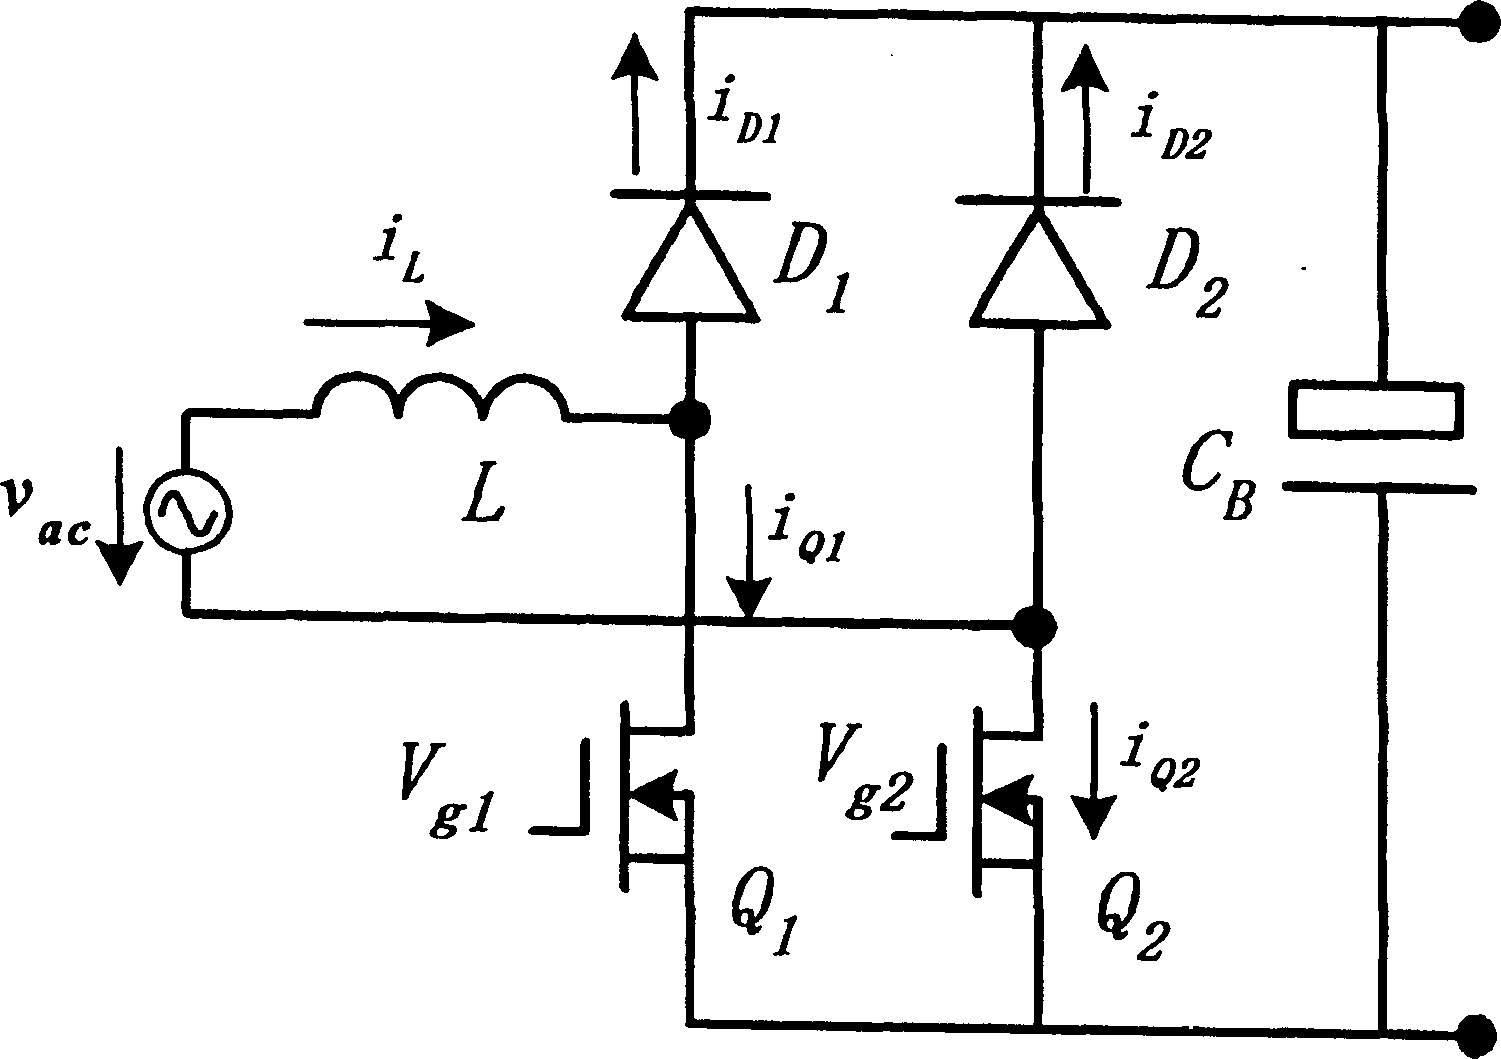 Novel architecture of power supply system for liquid crystal display equipment